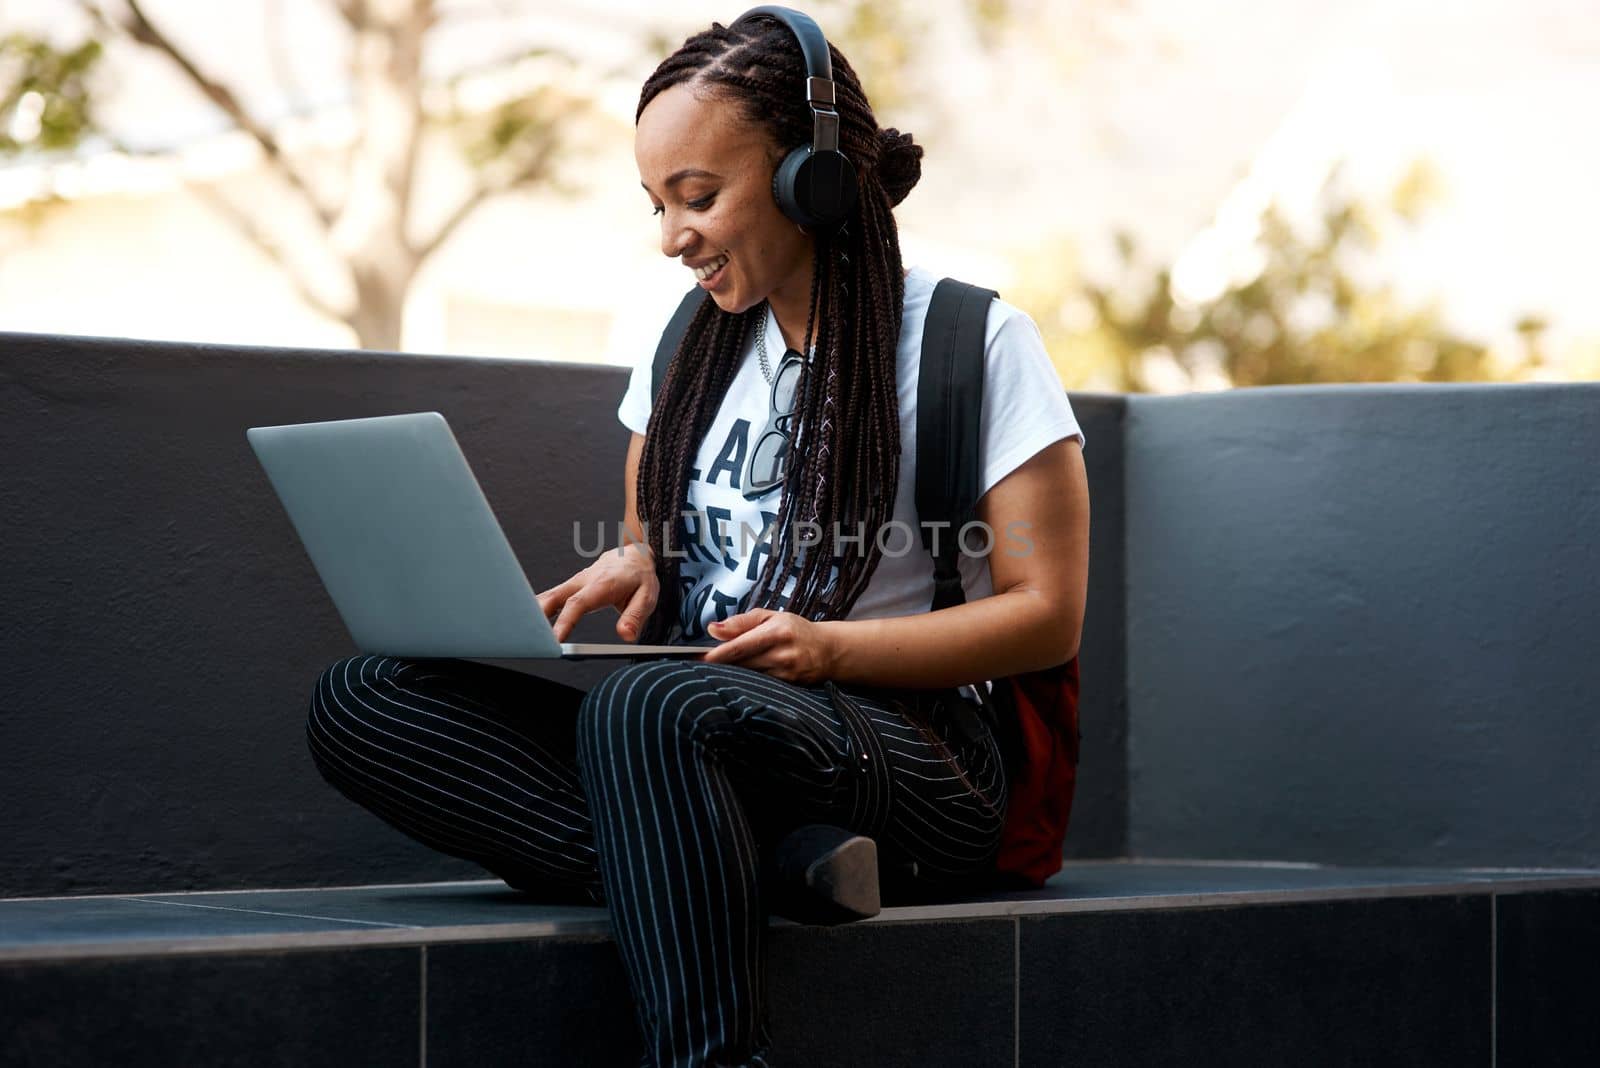 Blogging outdoors is always fun. an attractive young woman listening to music and using her laptop while relaxing outdoors